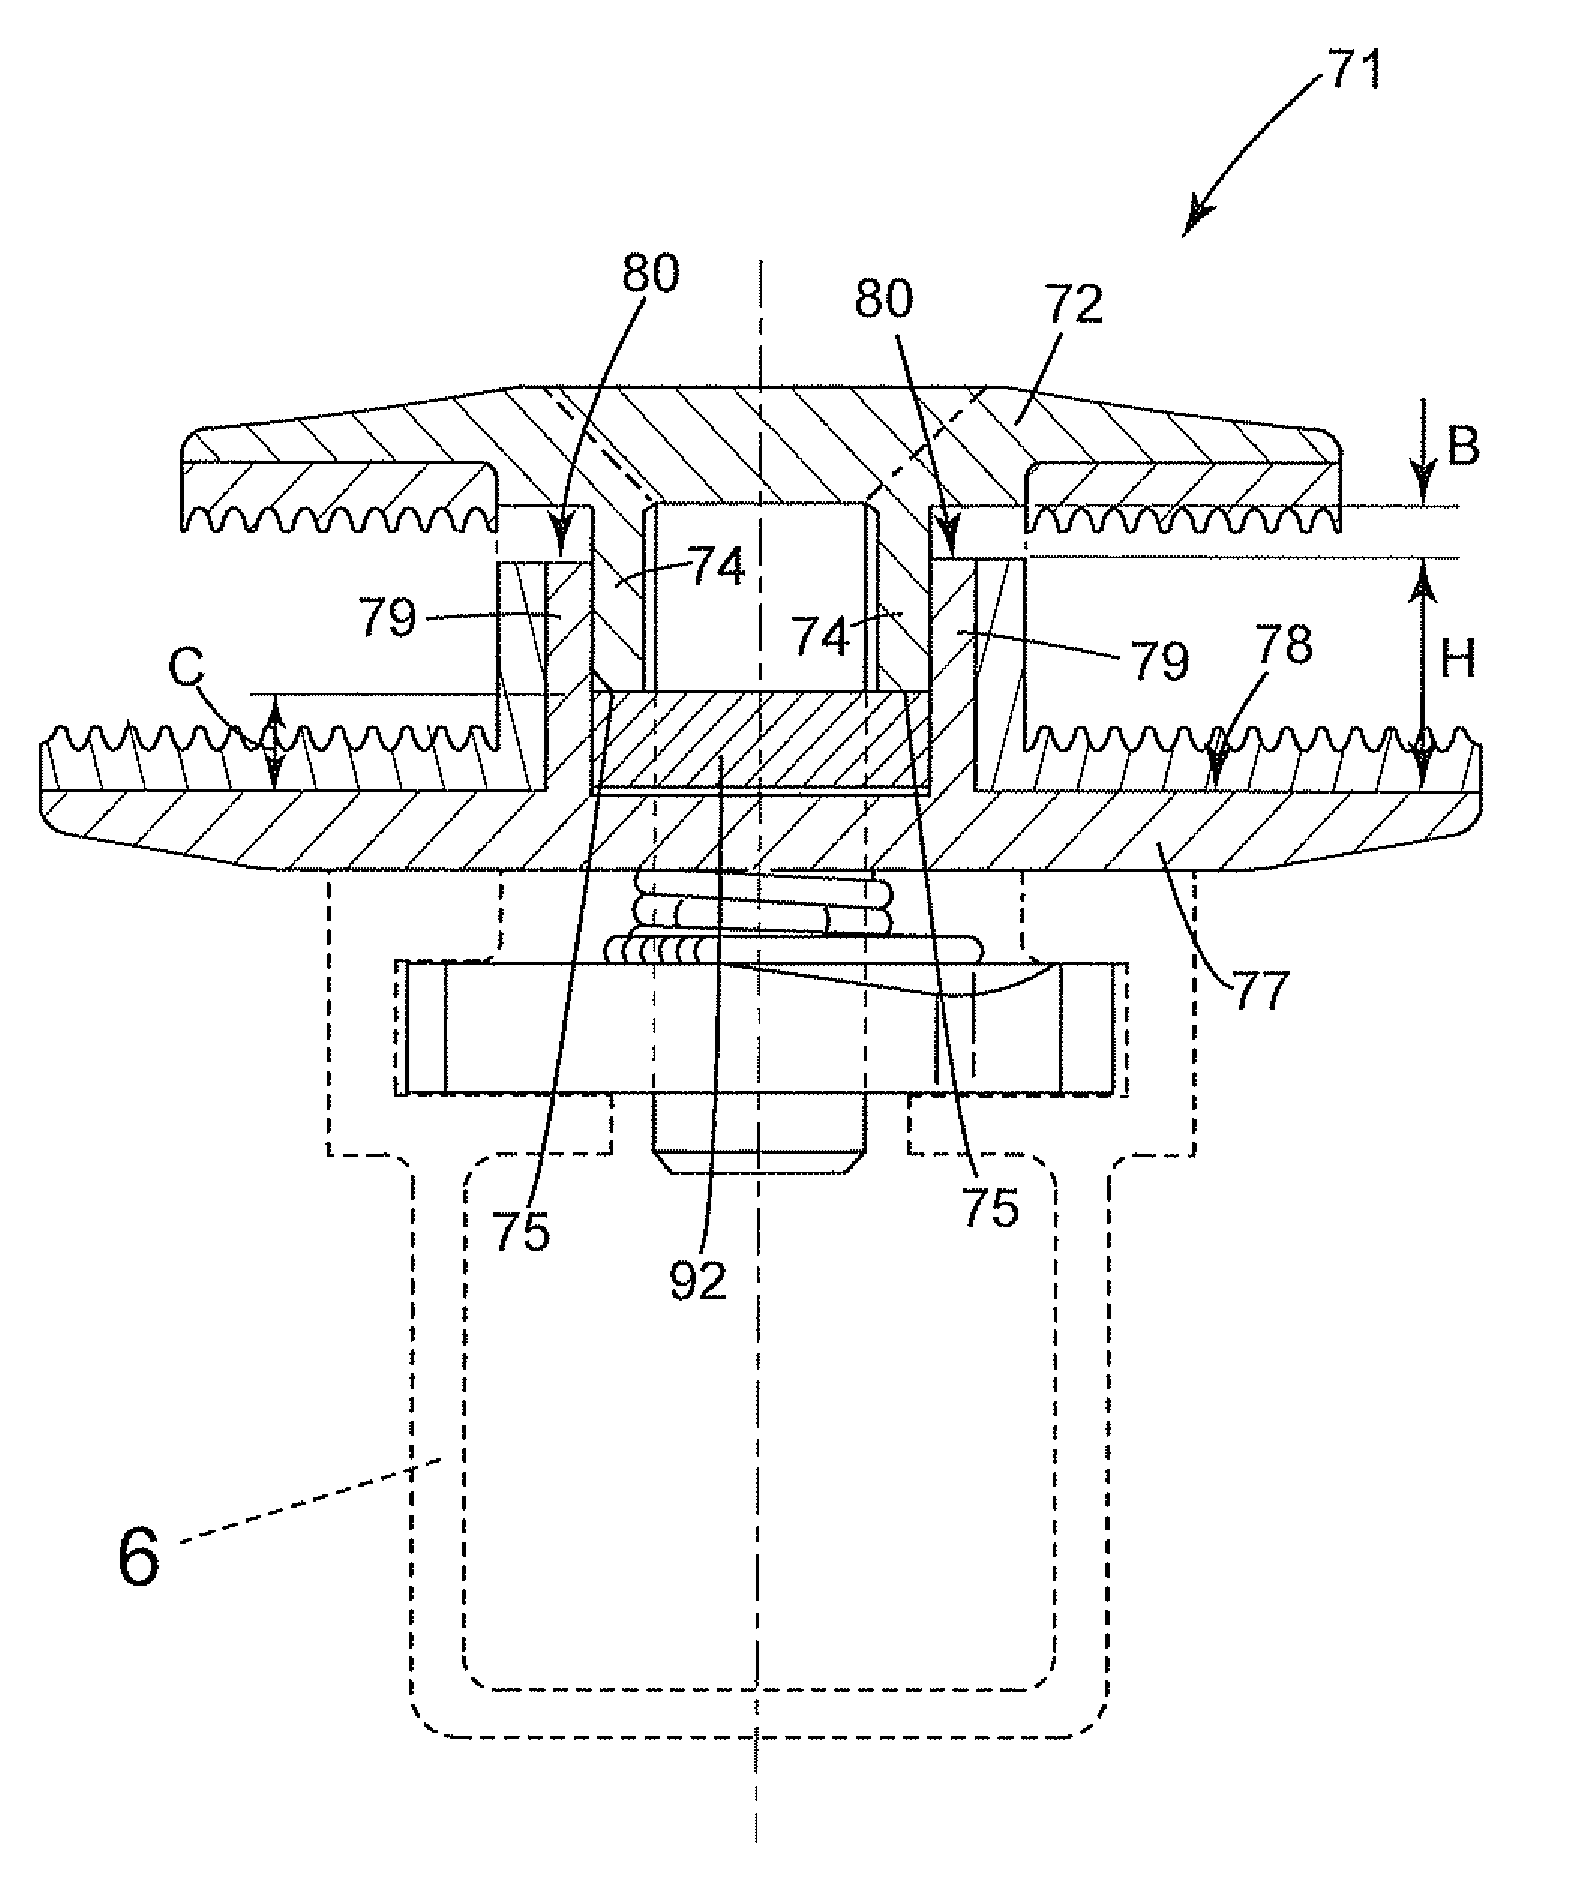 Mounting device for securing plate-shaped elements